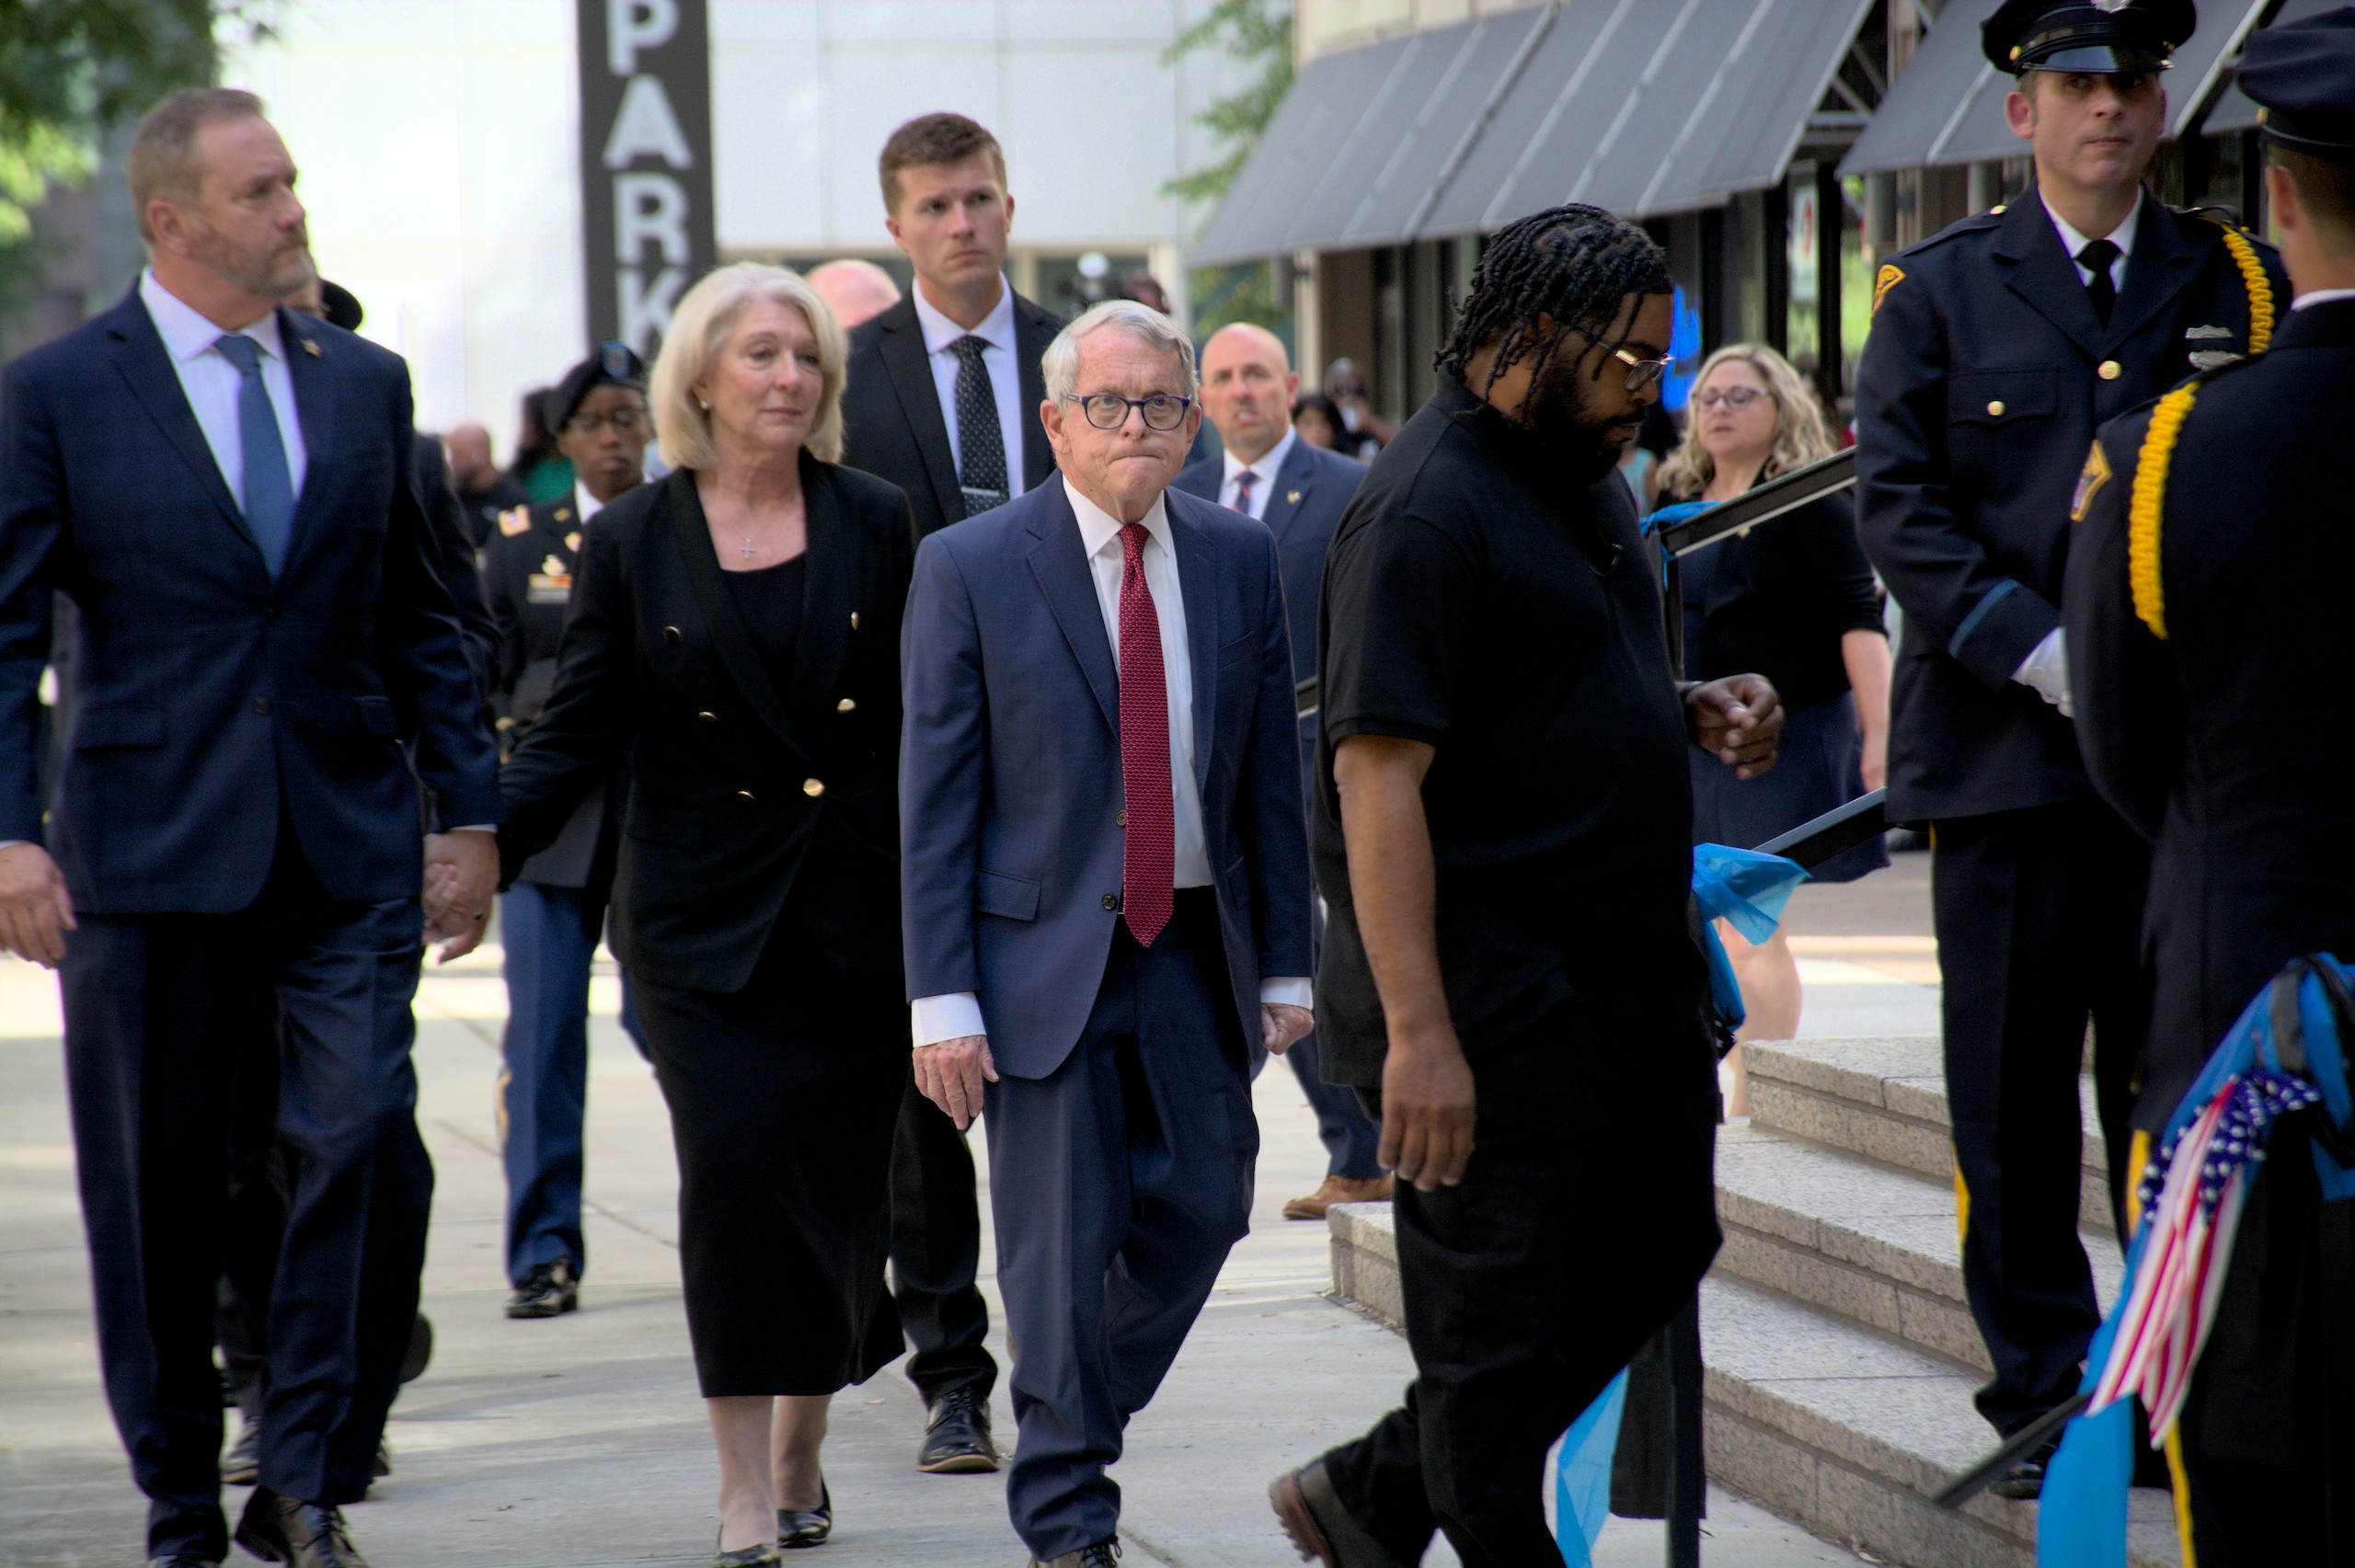 Ohio Gov. Mike Dewine, center, and Attorney General Dave Yost, left, arrive at the Cathedral of St. John the Evangelist for the memorial service for Cleveland Officer Jamieson Ritter.